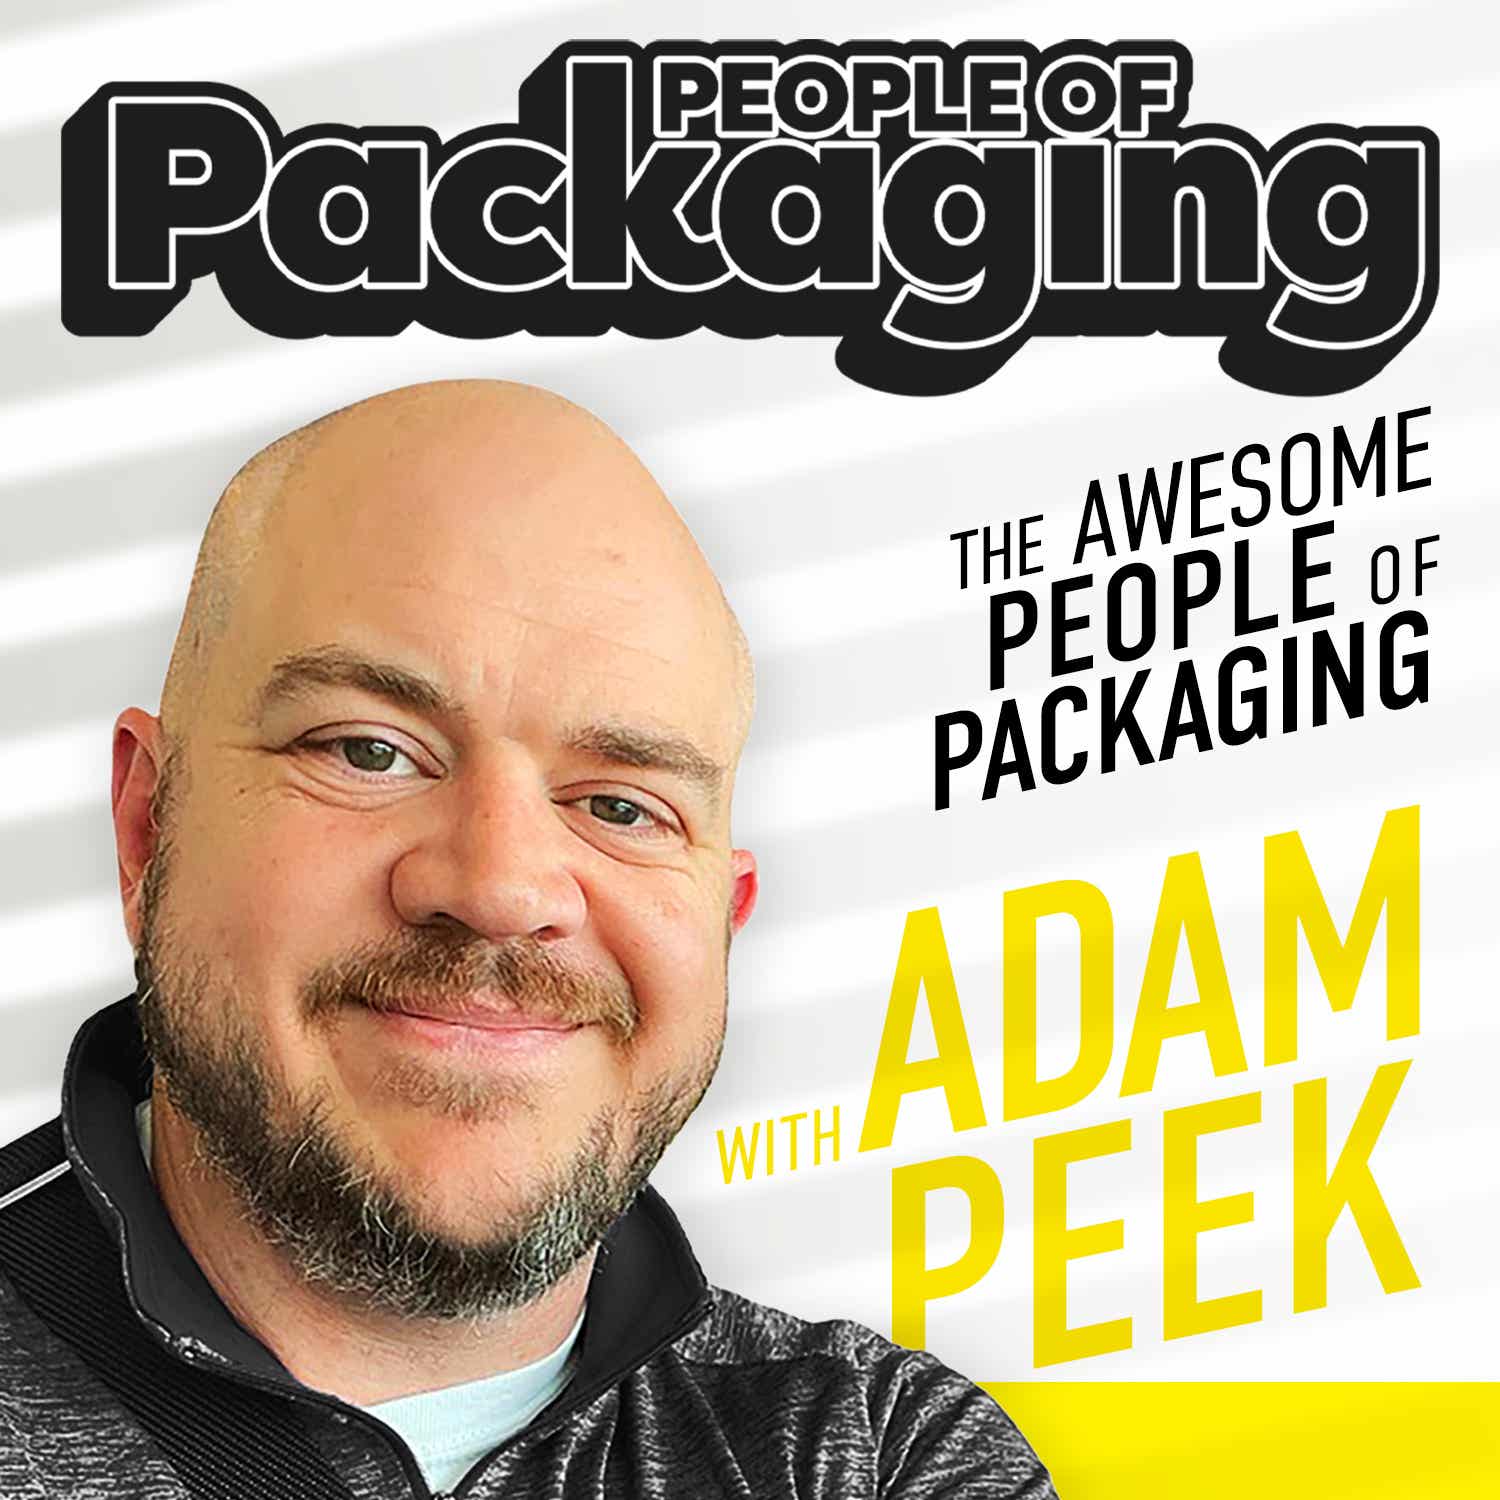 People of Packaging Podcast by Adam Peek and Ted Taitt